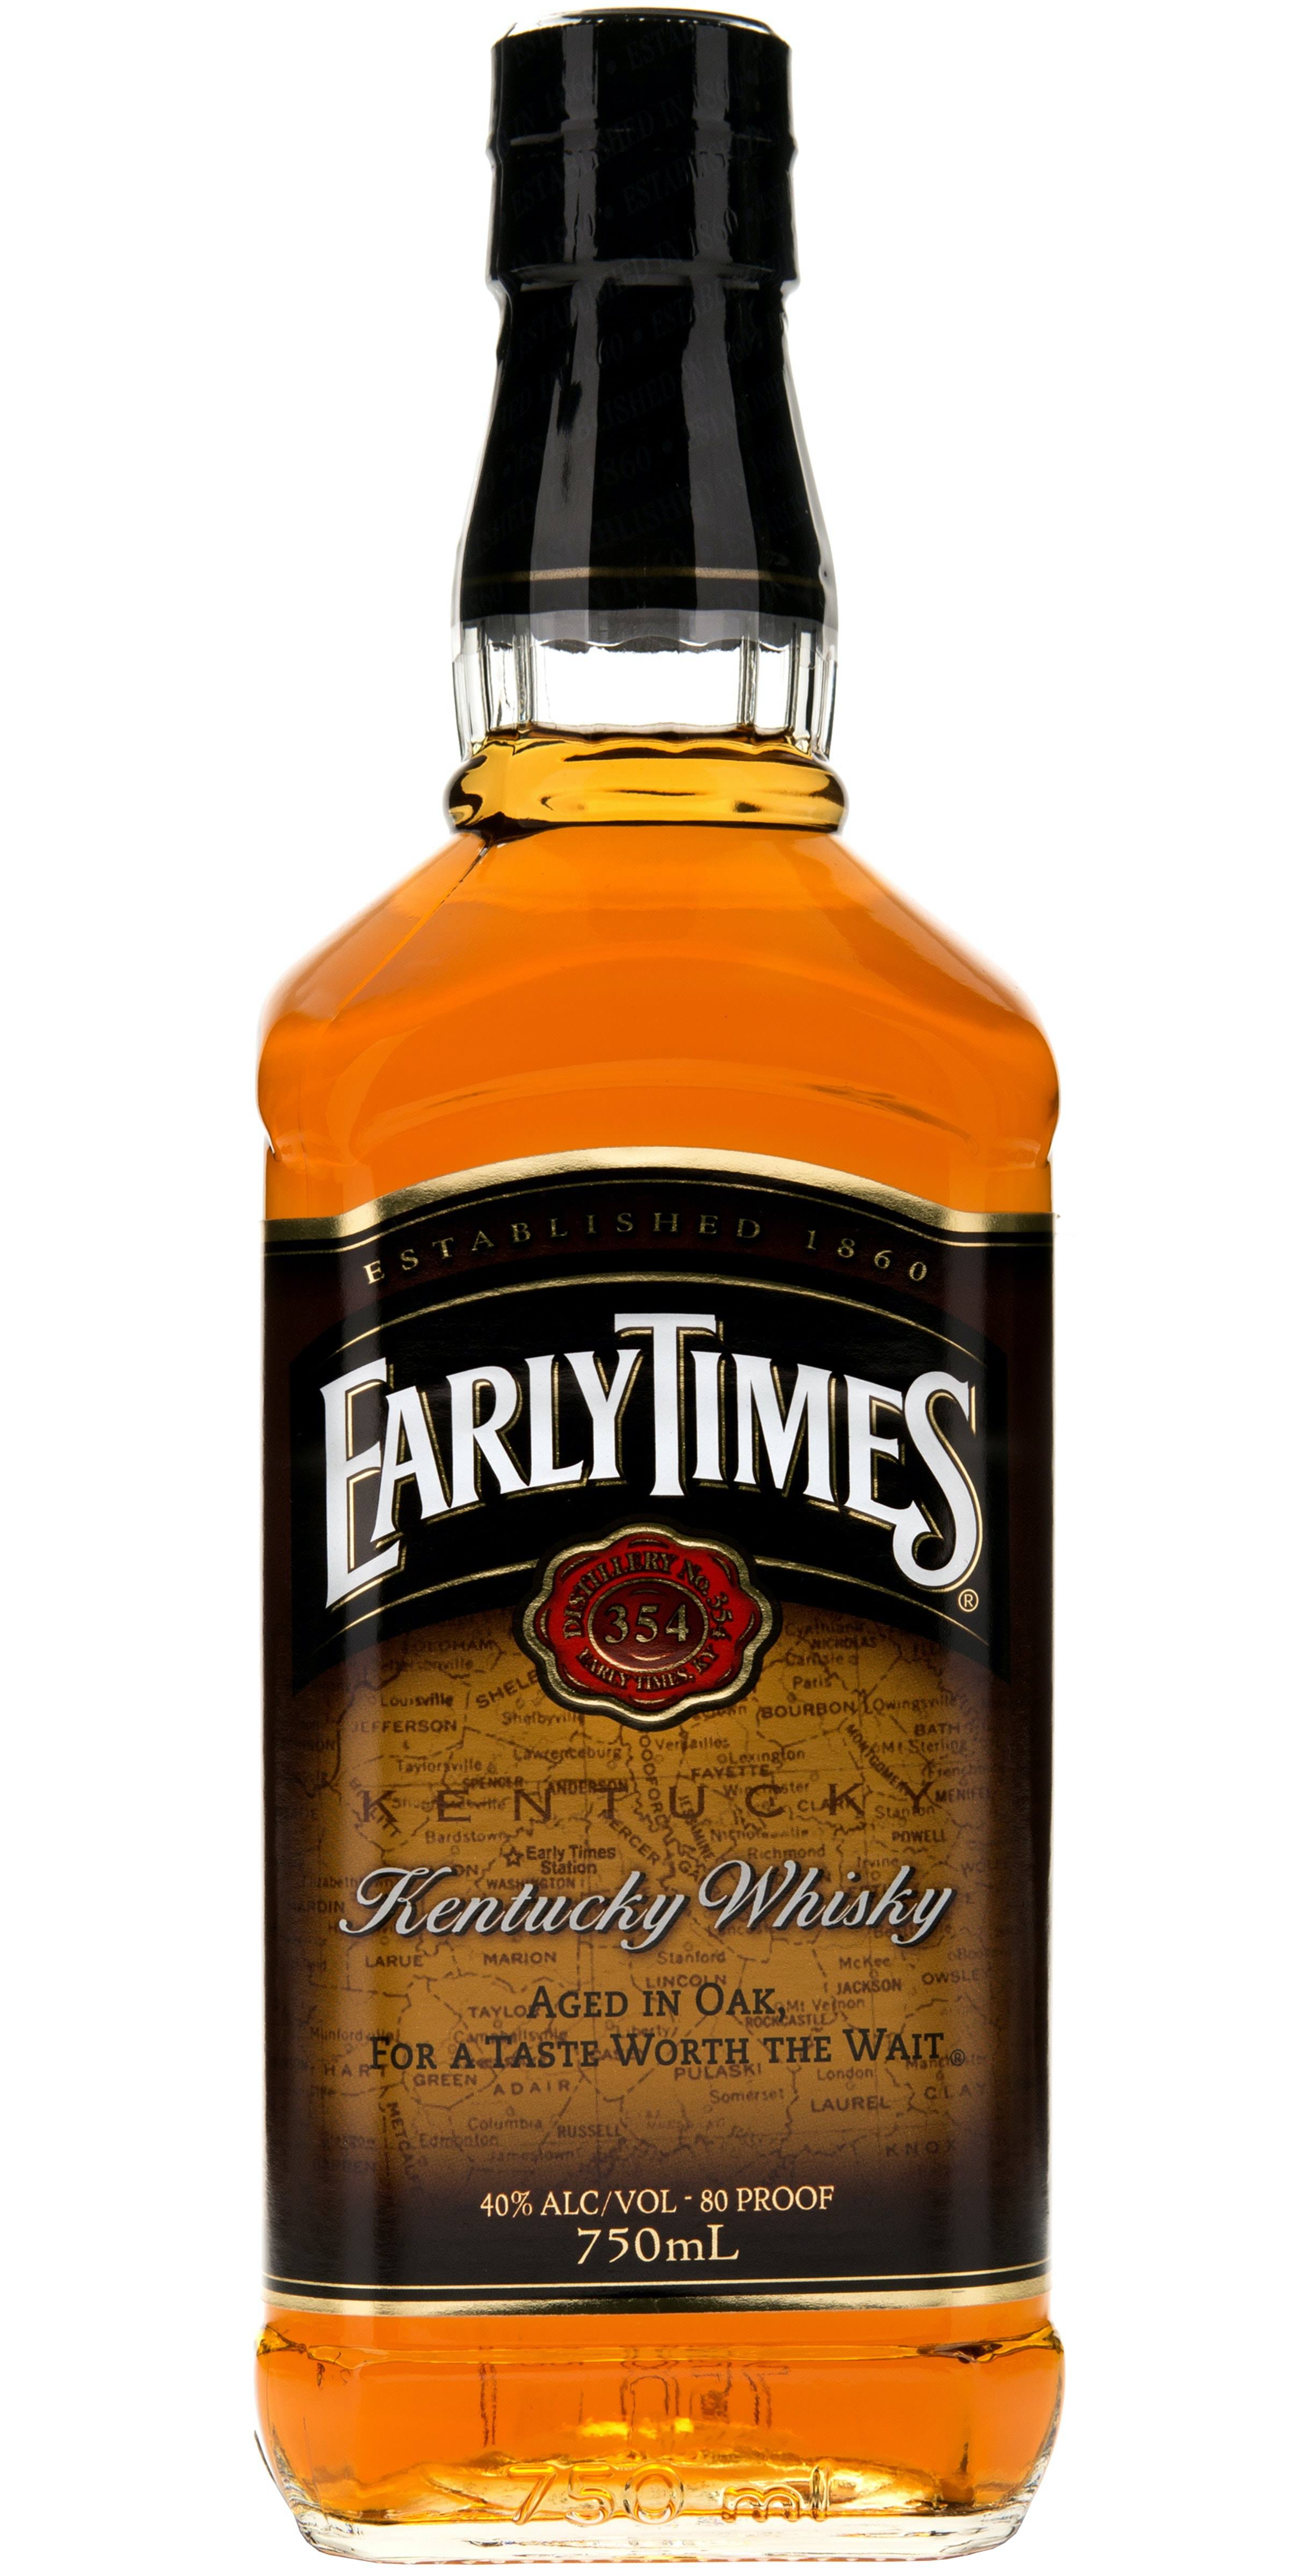 Early Times Kentucky Whiskey 750 ml